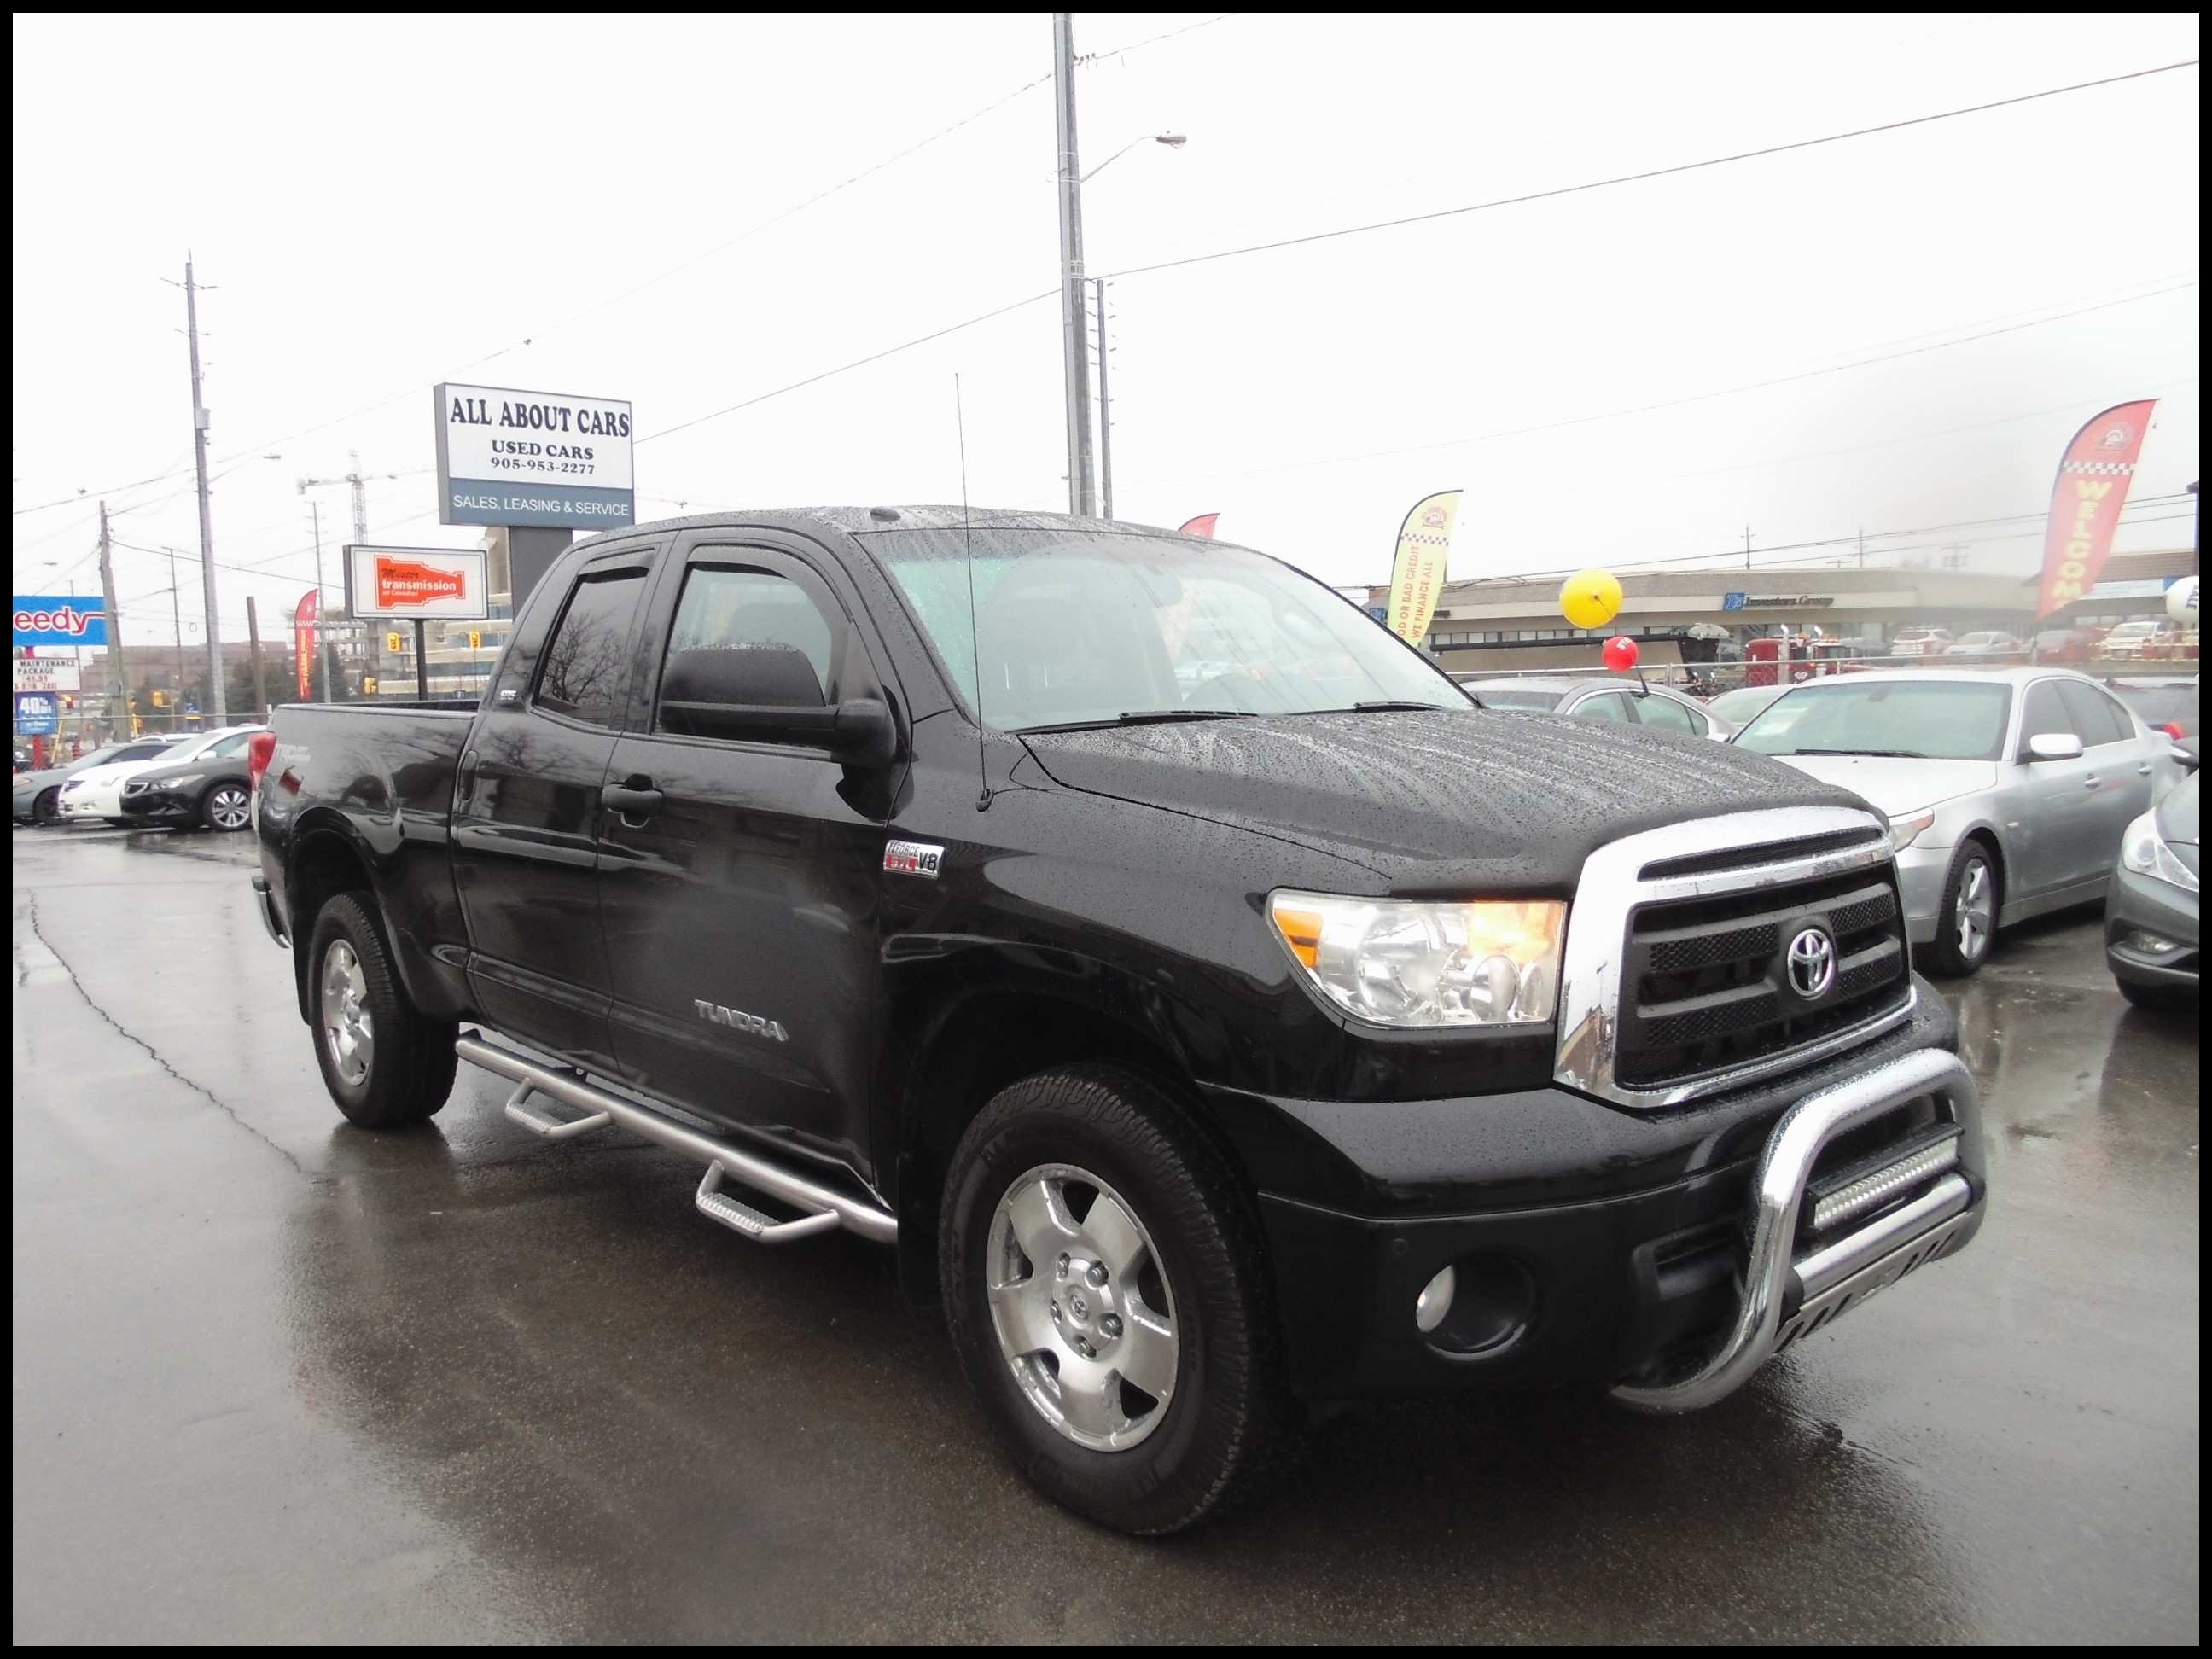 4 Door Pickup Trucks for Sale Best 2010 toyota Tundra Sr5 Double Cab – All